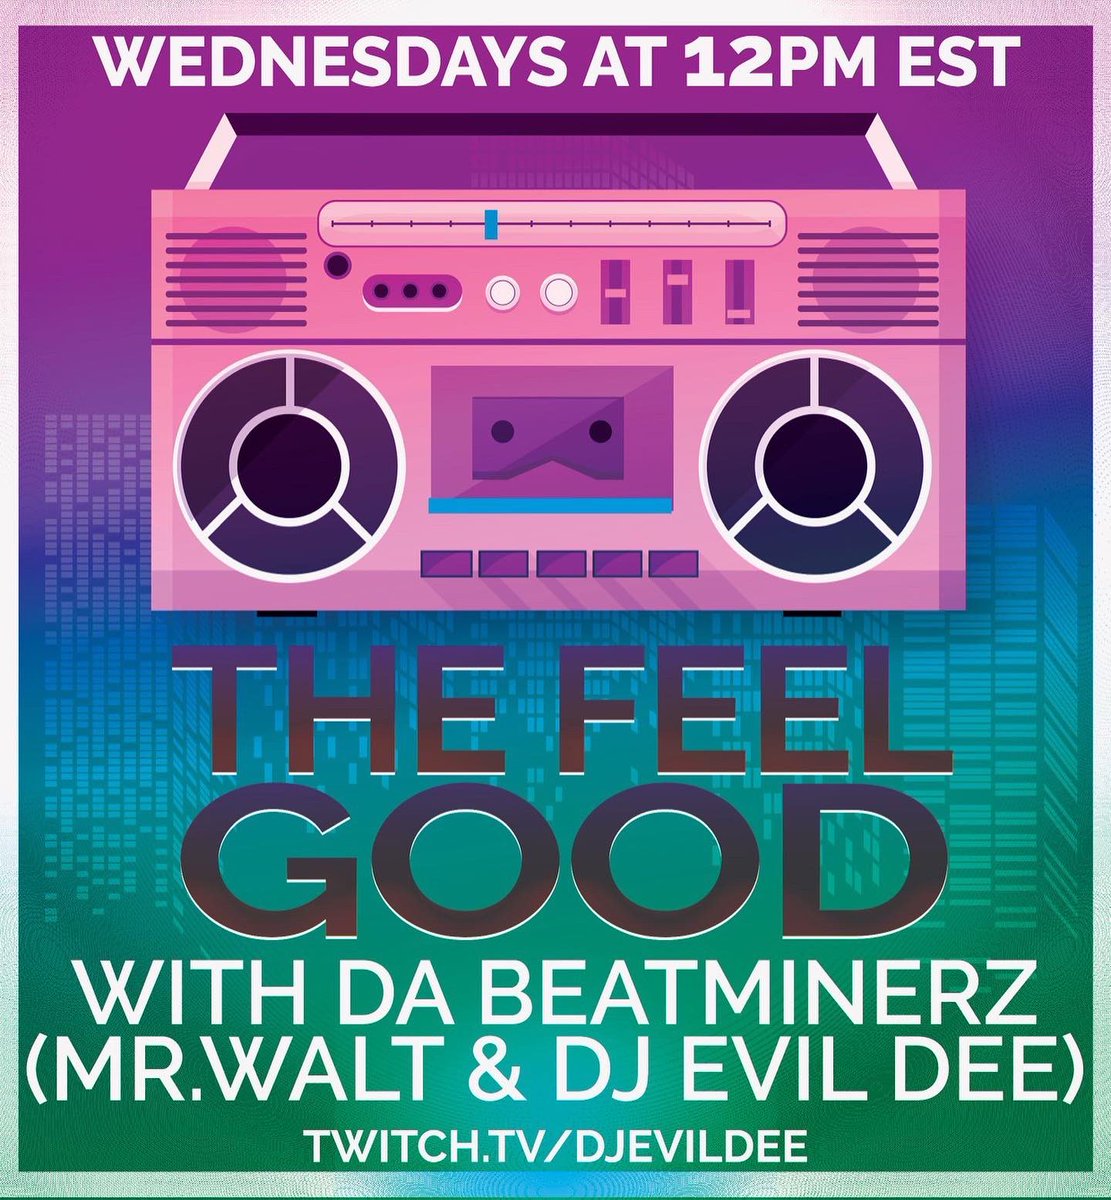 THE FEEL GOOD WITH @djevildee & @beatminerz IS LIVE ON twitch TODAY AT 12PM EST !!! twitch.tv/djevildee 🔗 IN BIO !!!